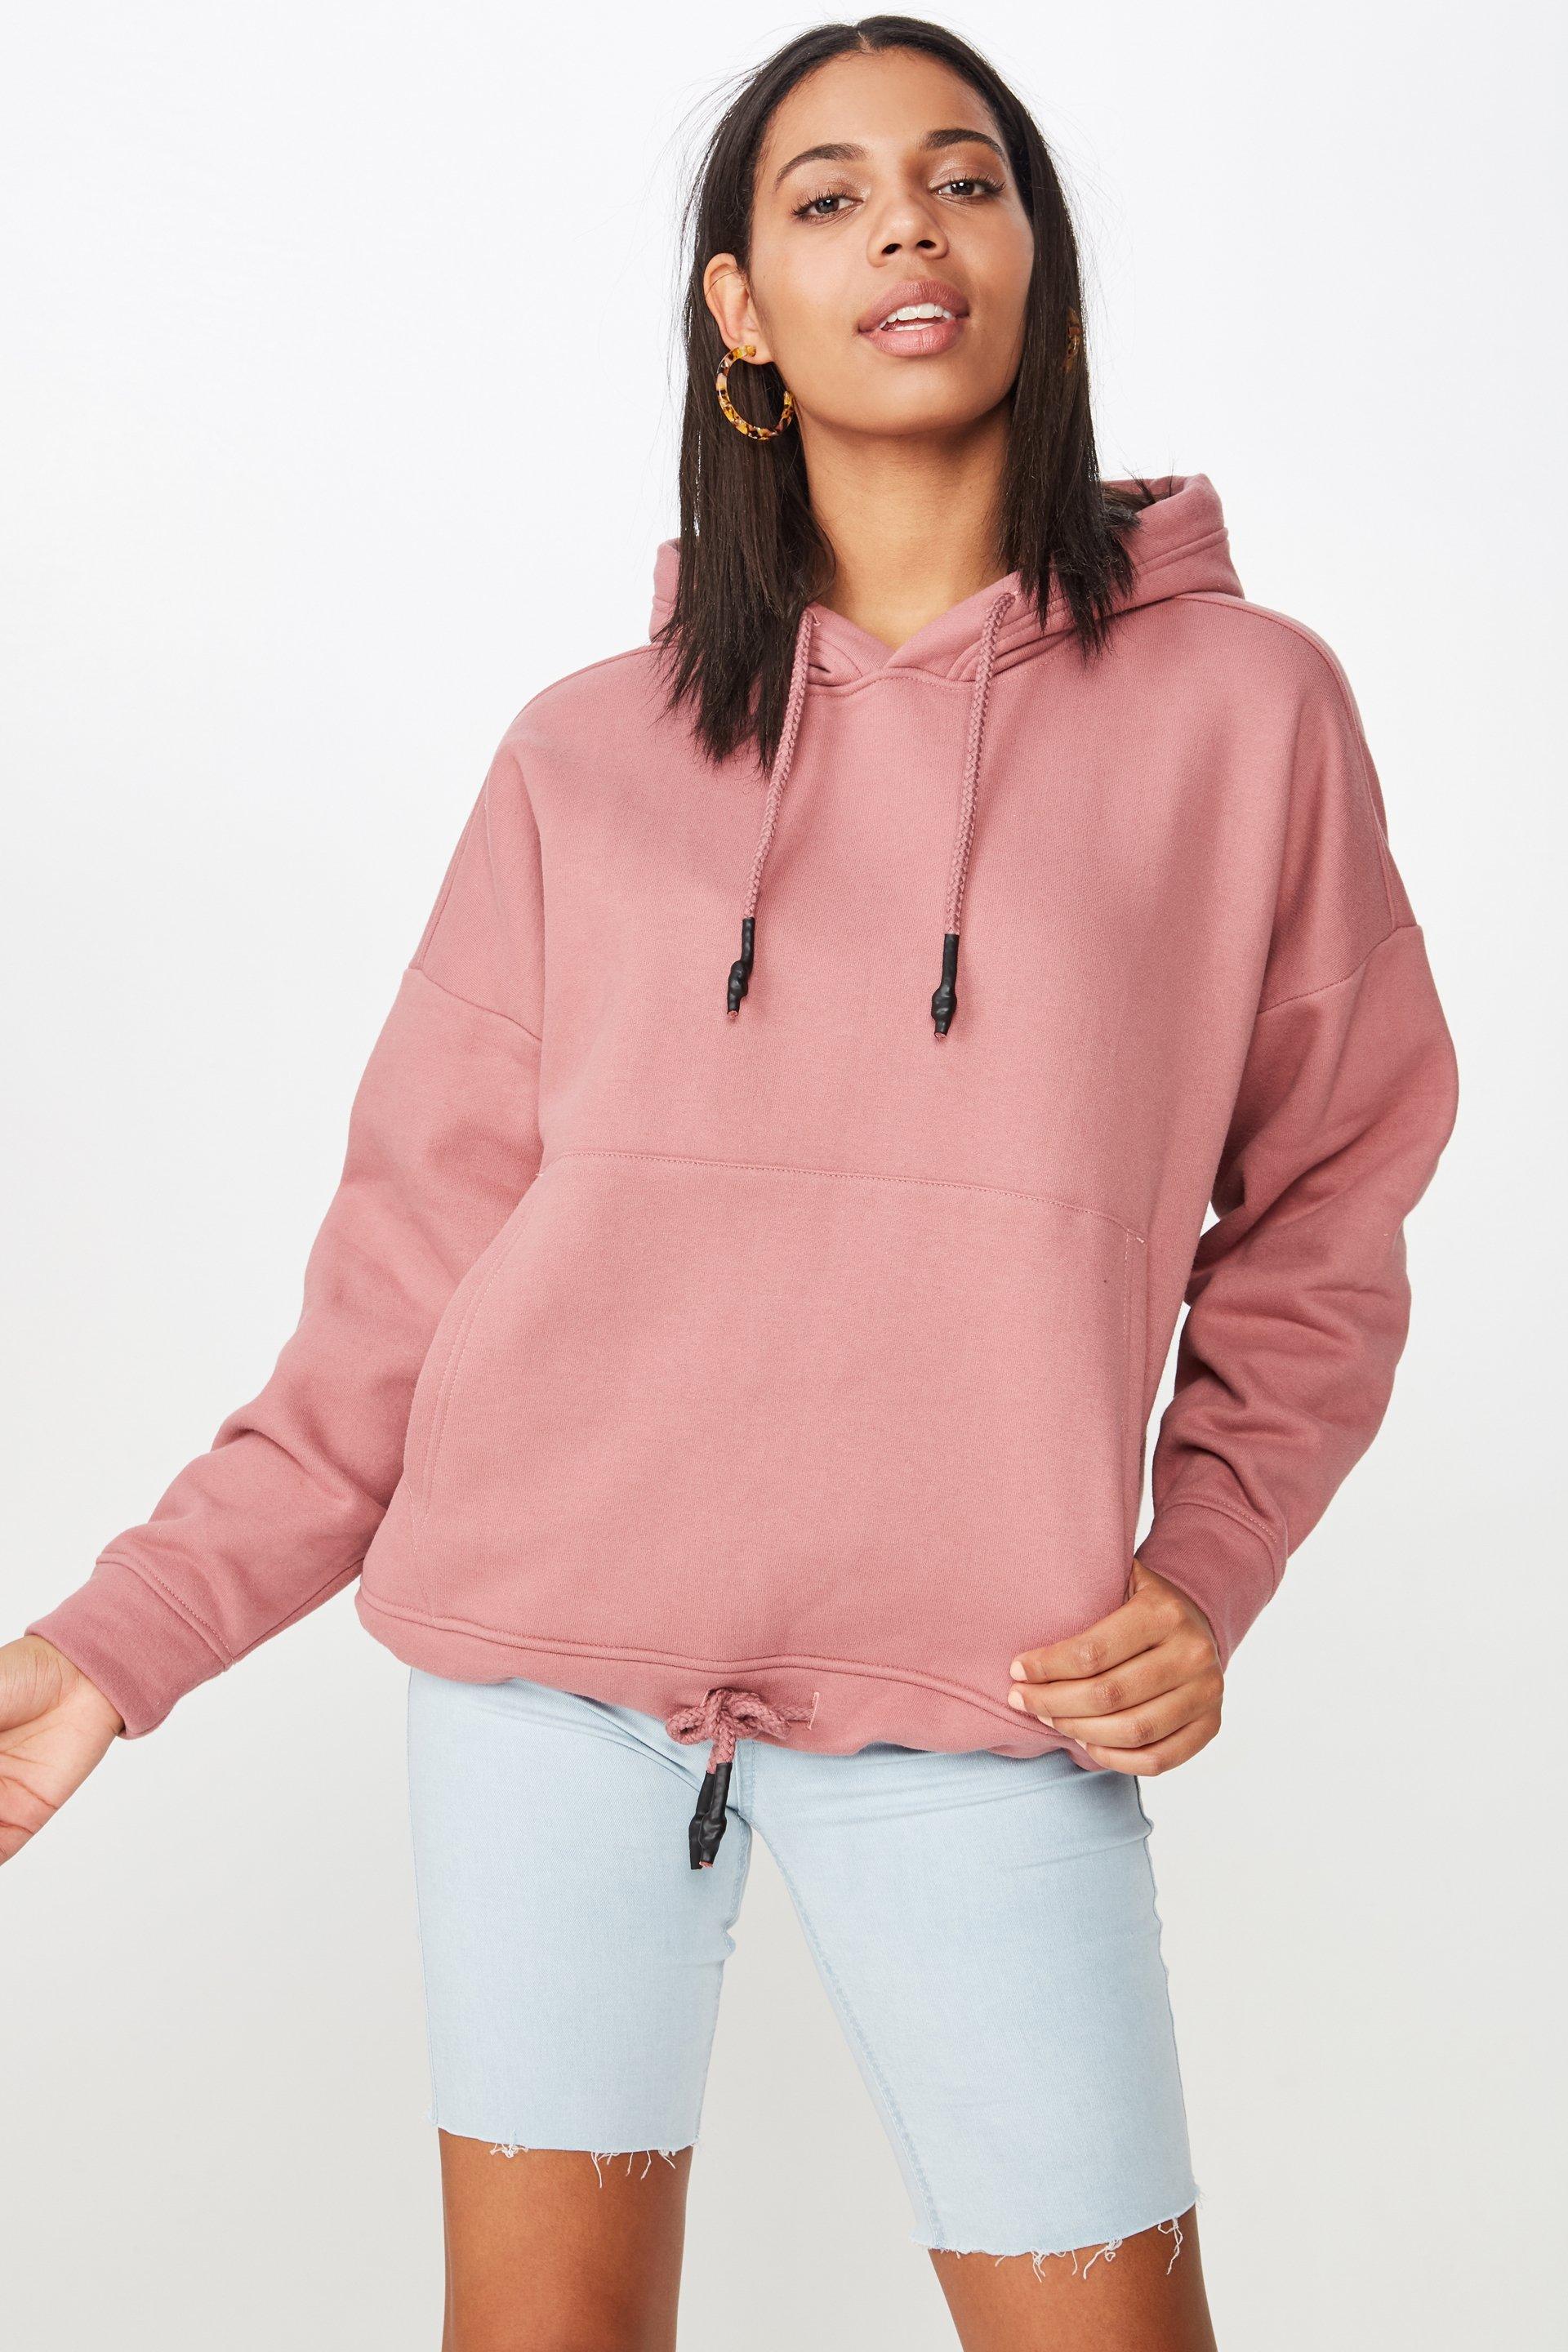 Maxie oversized hoodie - cloudy grape Cotton On Knitwear | Superbalist.com